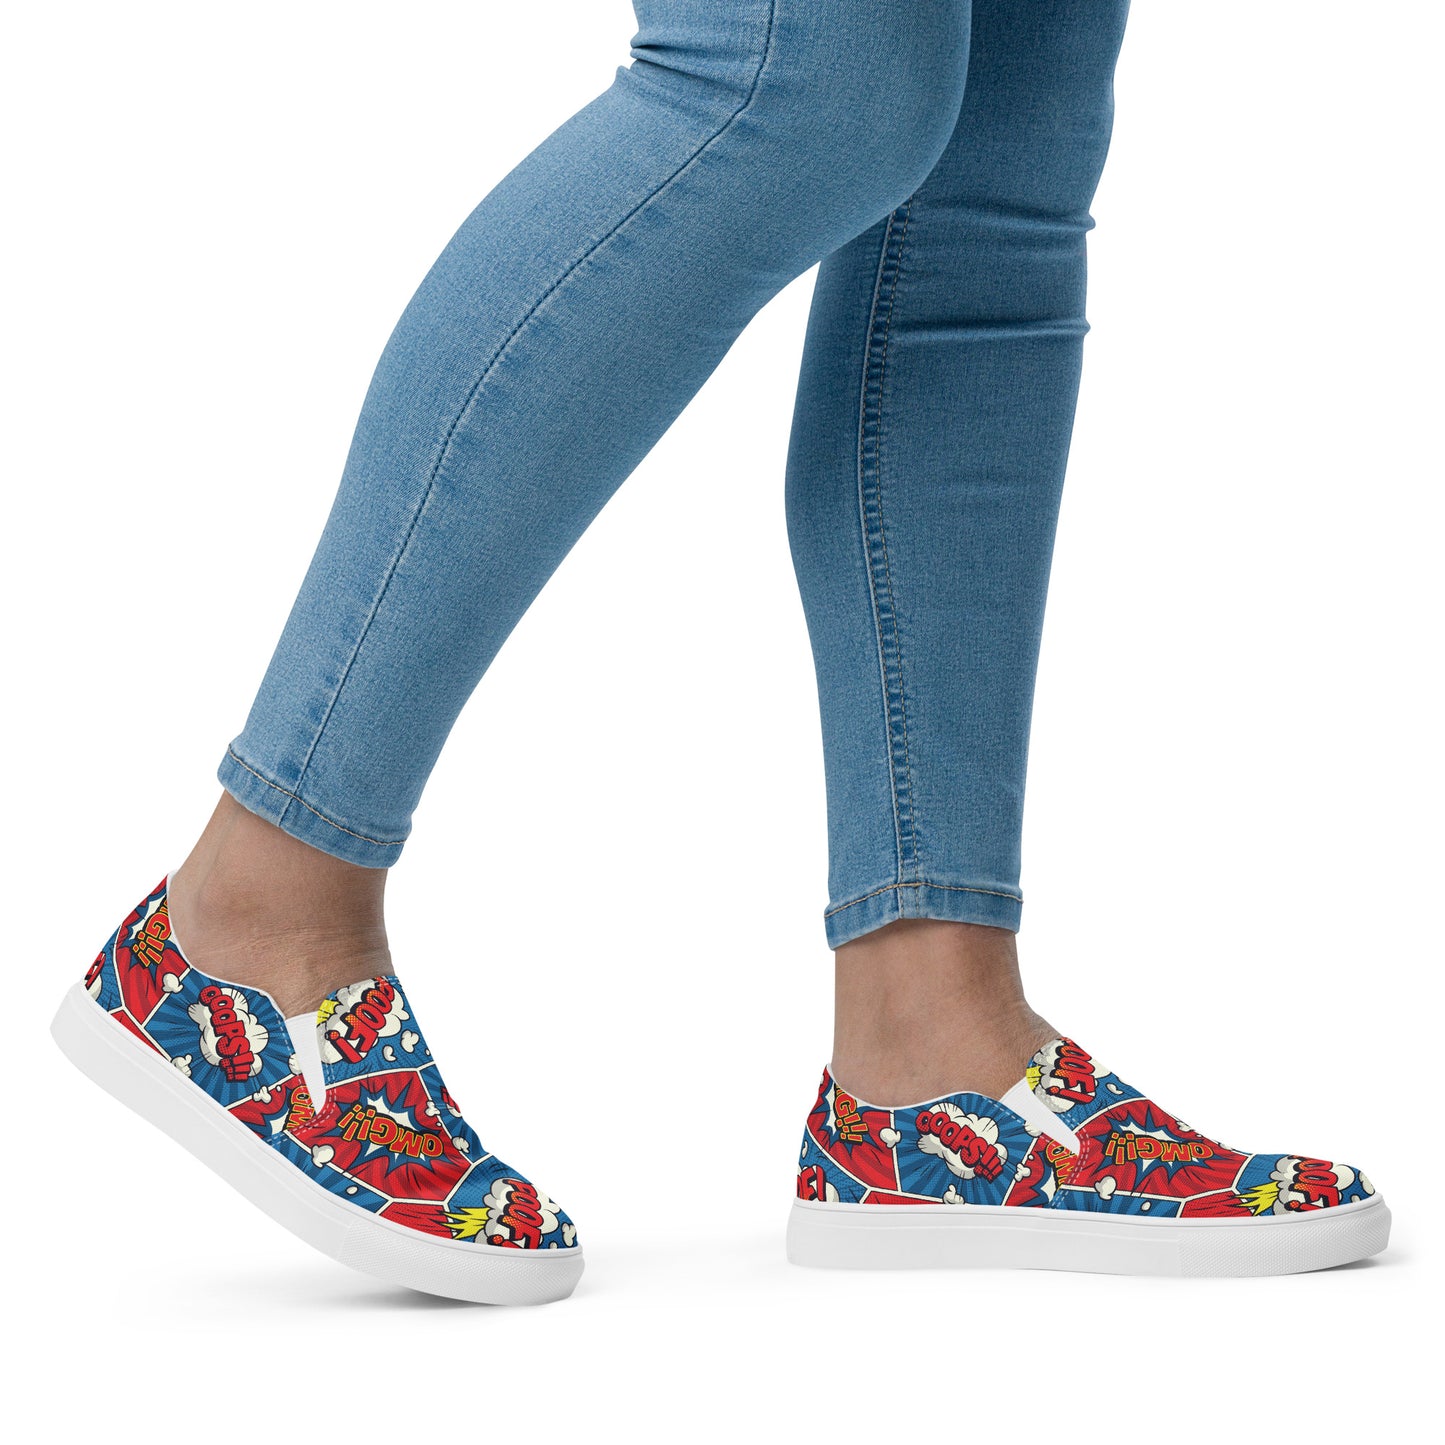 Comic Book - Women’s slip-on canvas shoes Womens Slip On Shoes